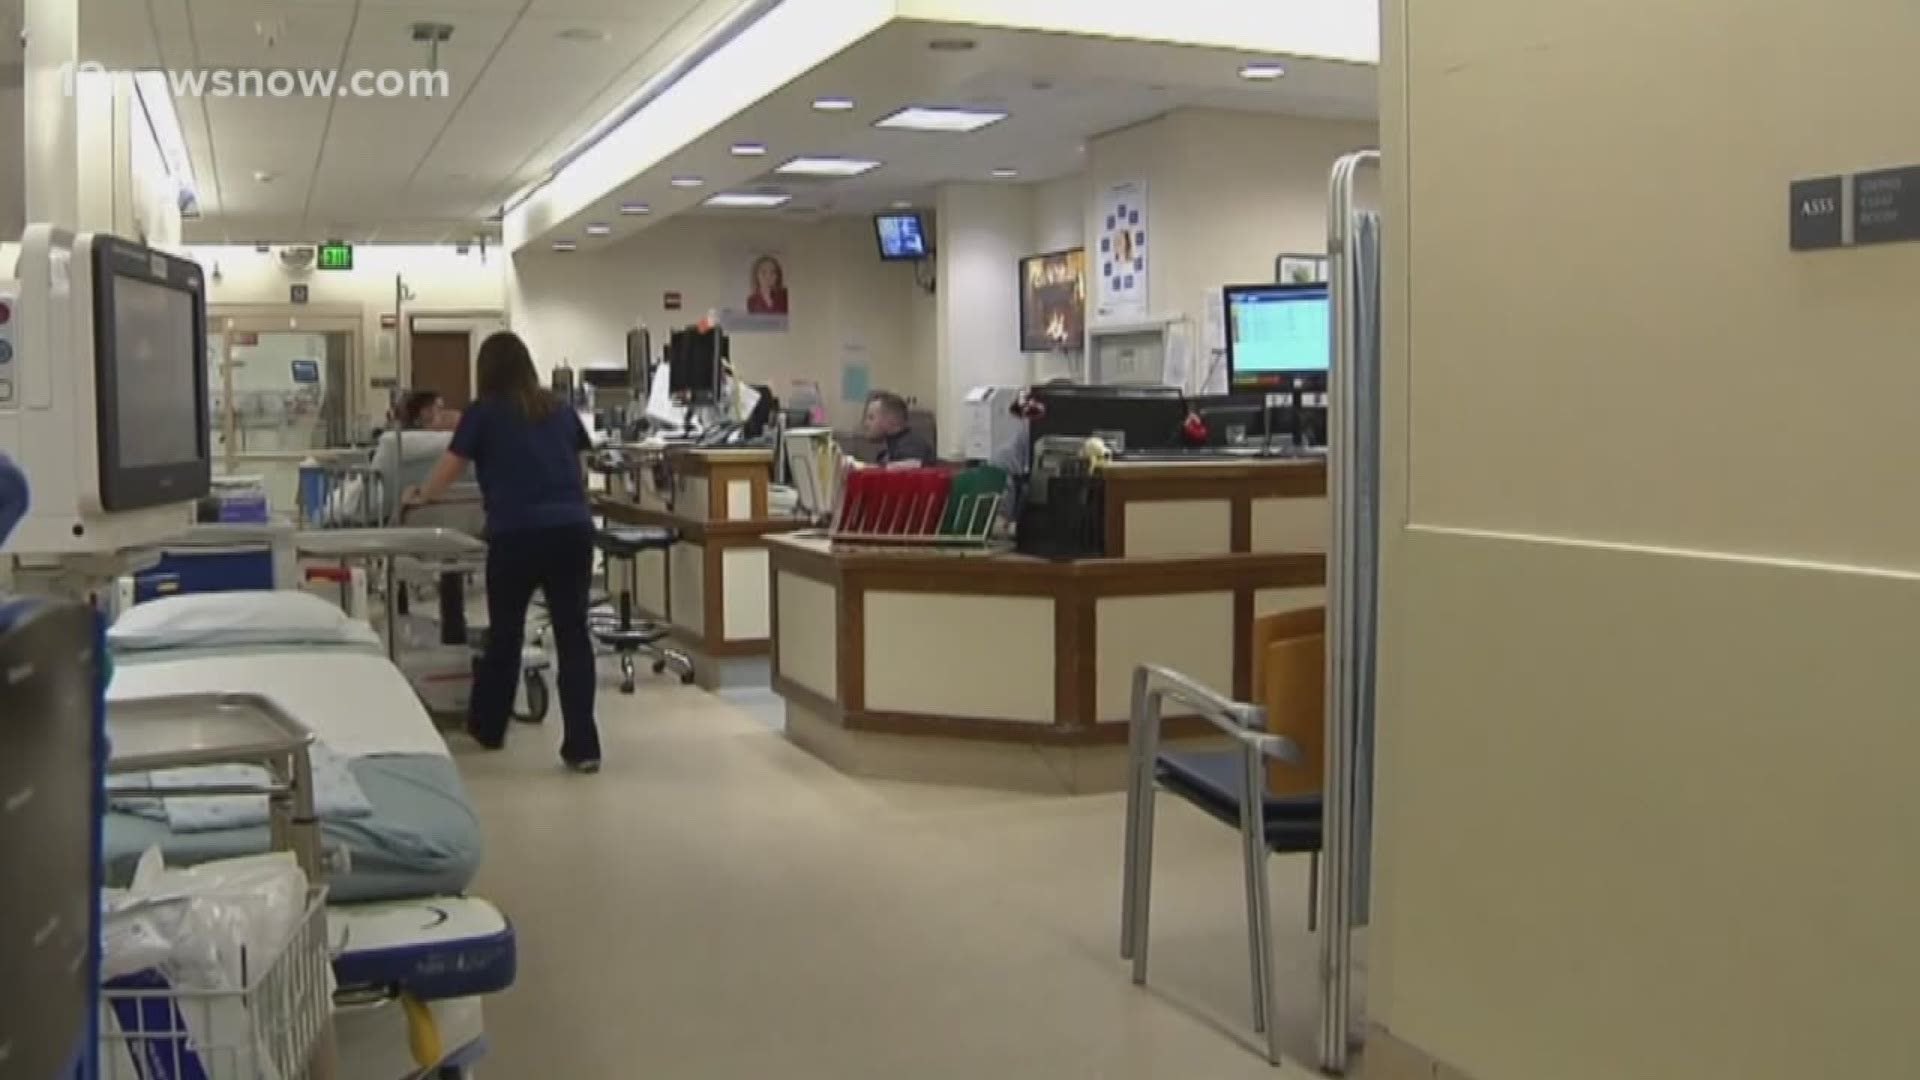 Some are raising concerns that Southeast Texas doesn't have enough beds to treat patients